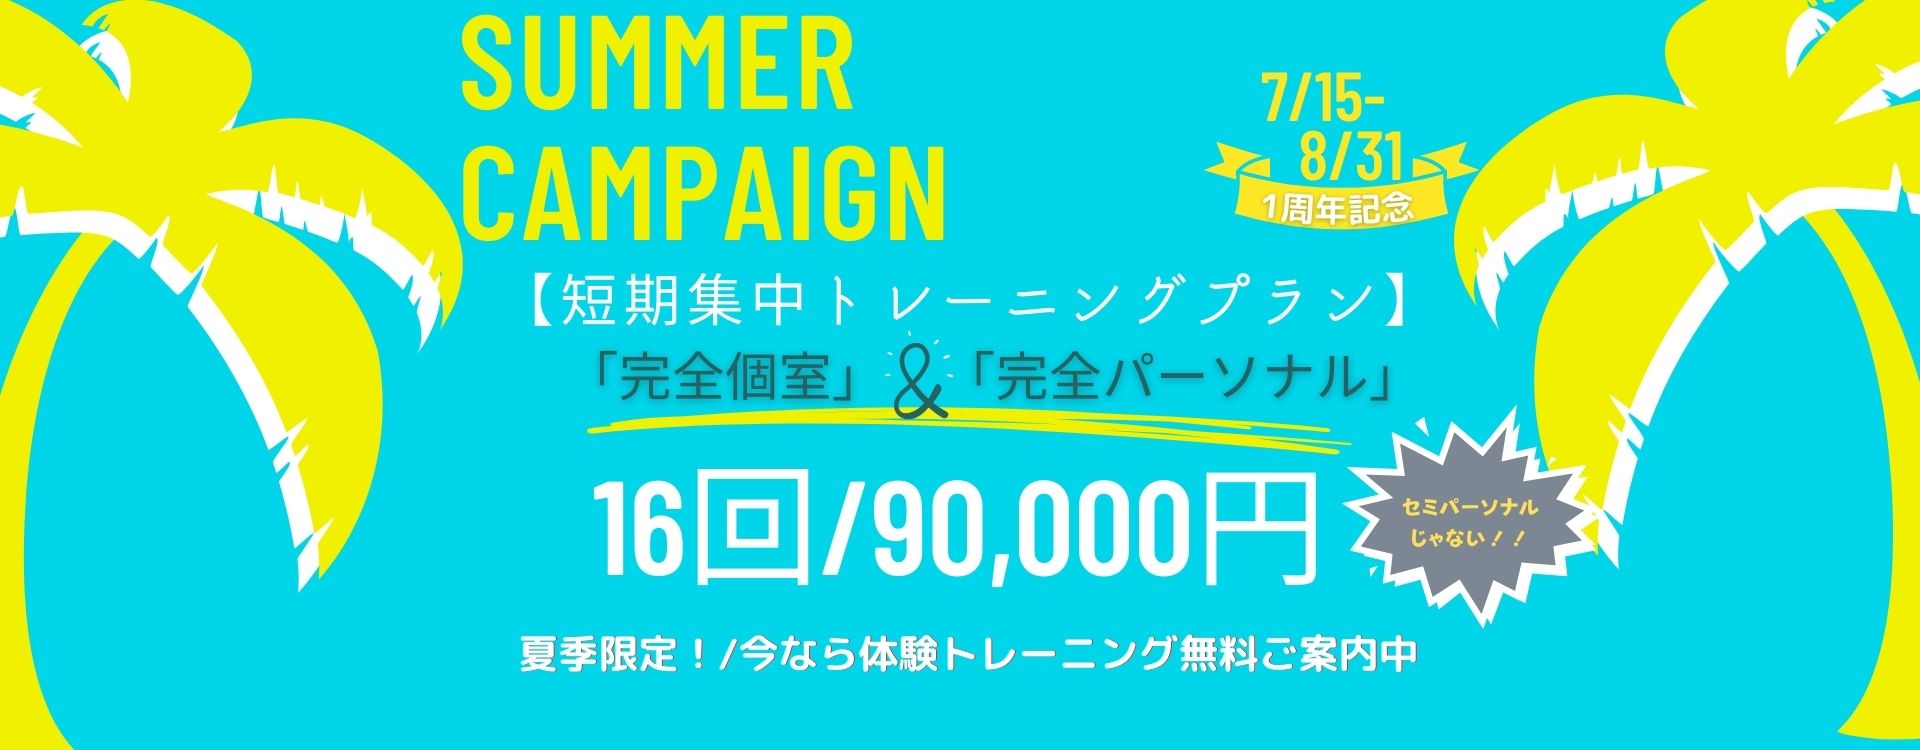 summer CAMPAIGN (1)